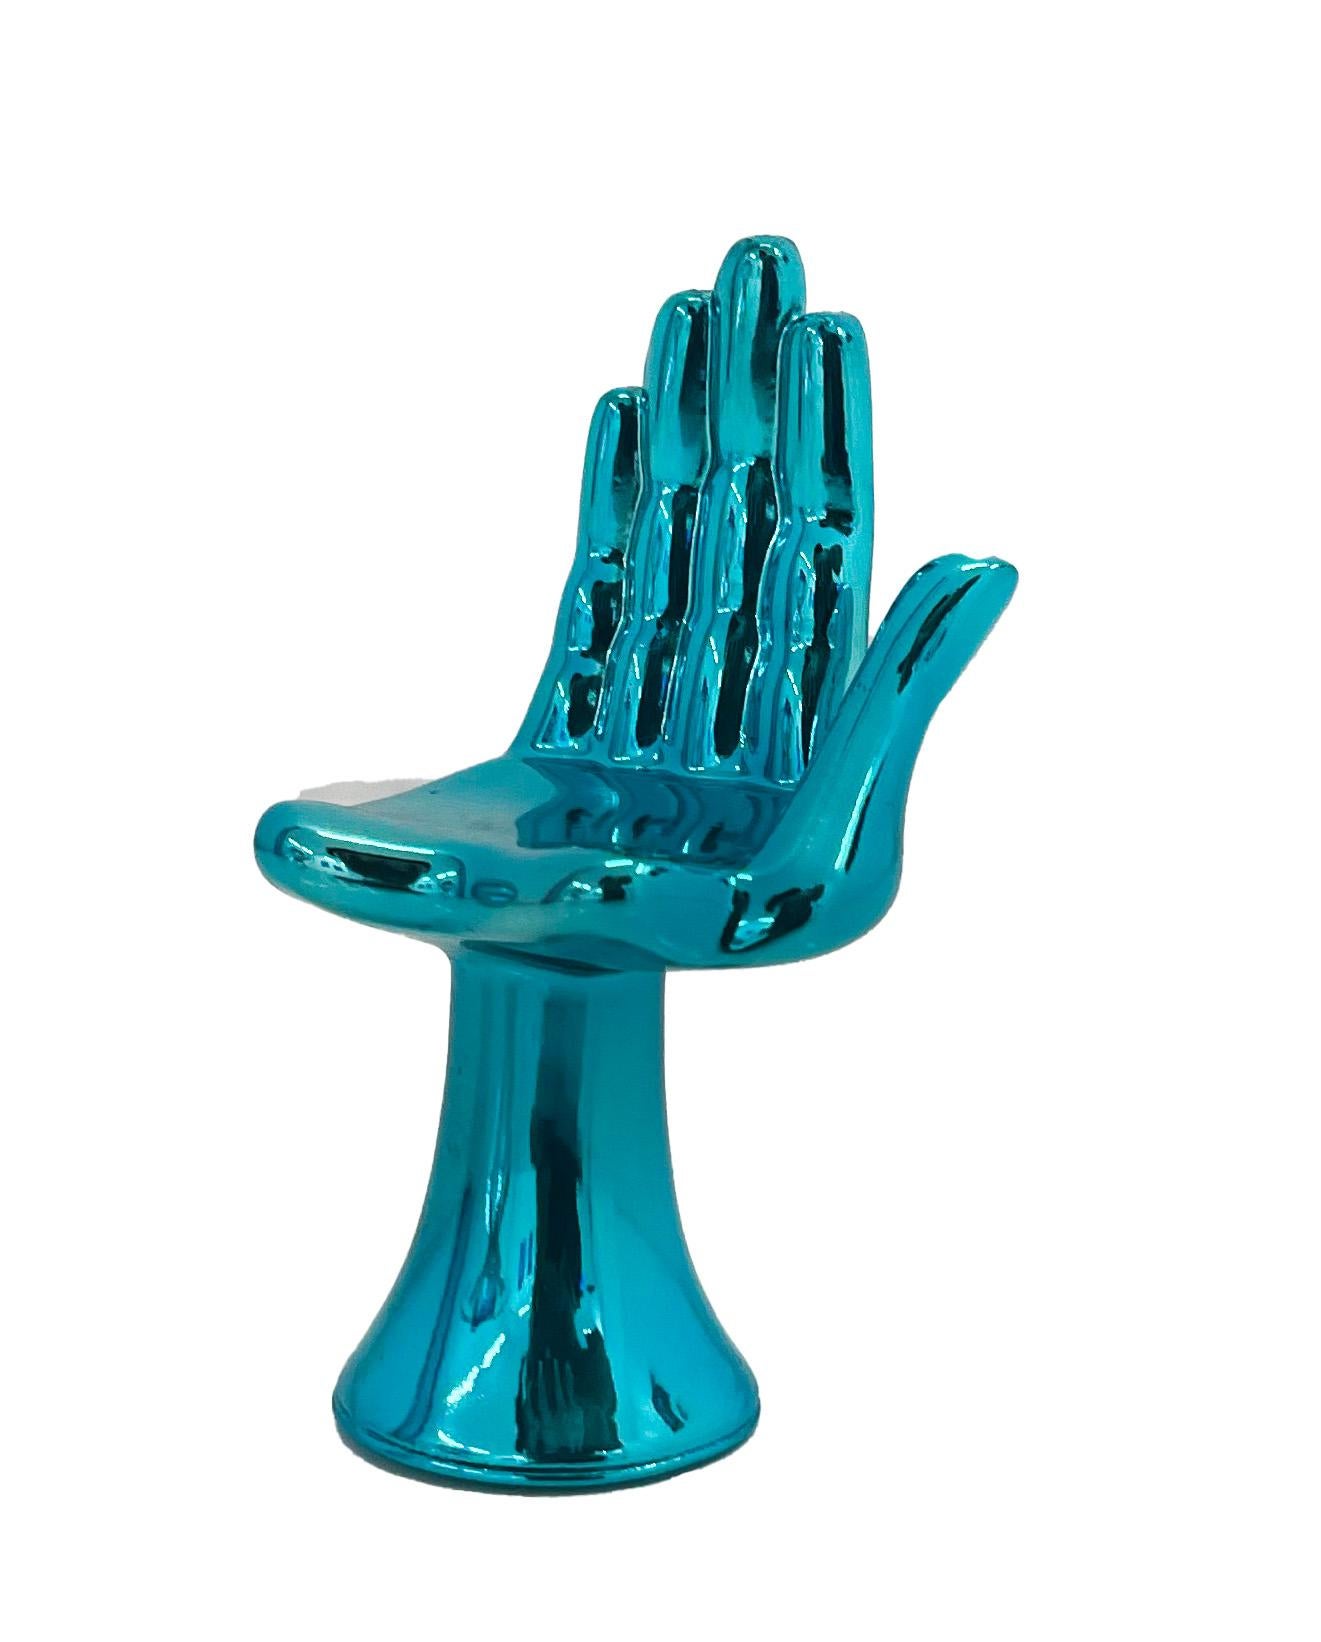 Pedro Friedeberg Figurative Sculpture - "Mano" - Mini version of Hand Chair by Friedeberg, sculpture, tiffany 